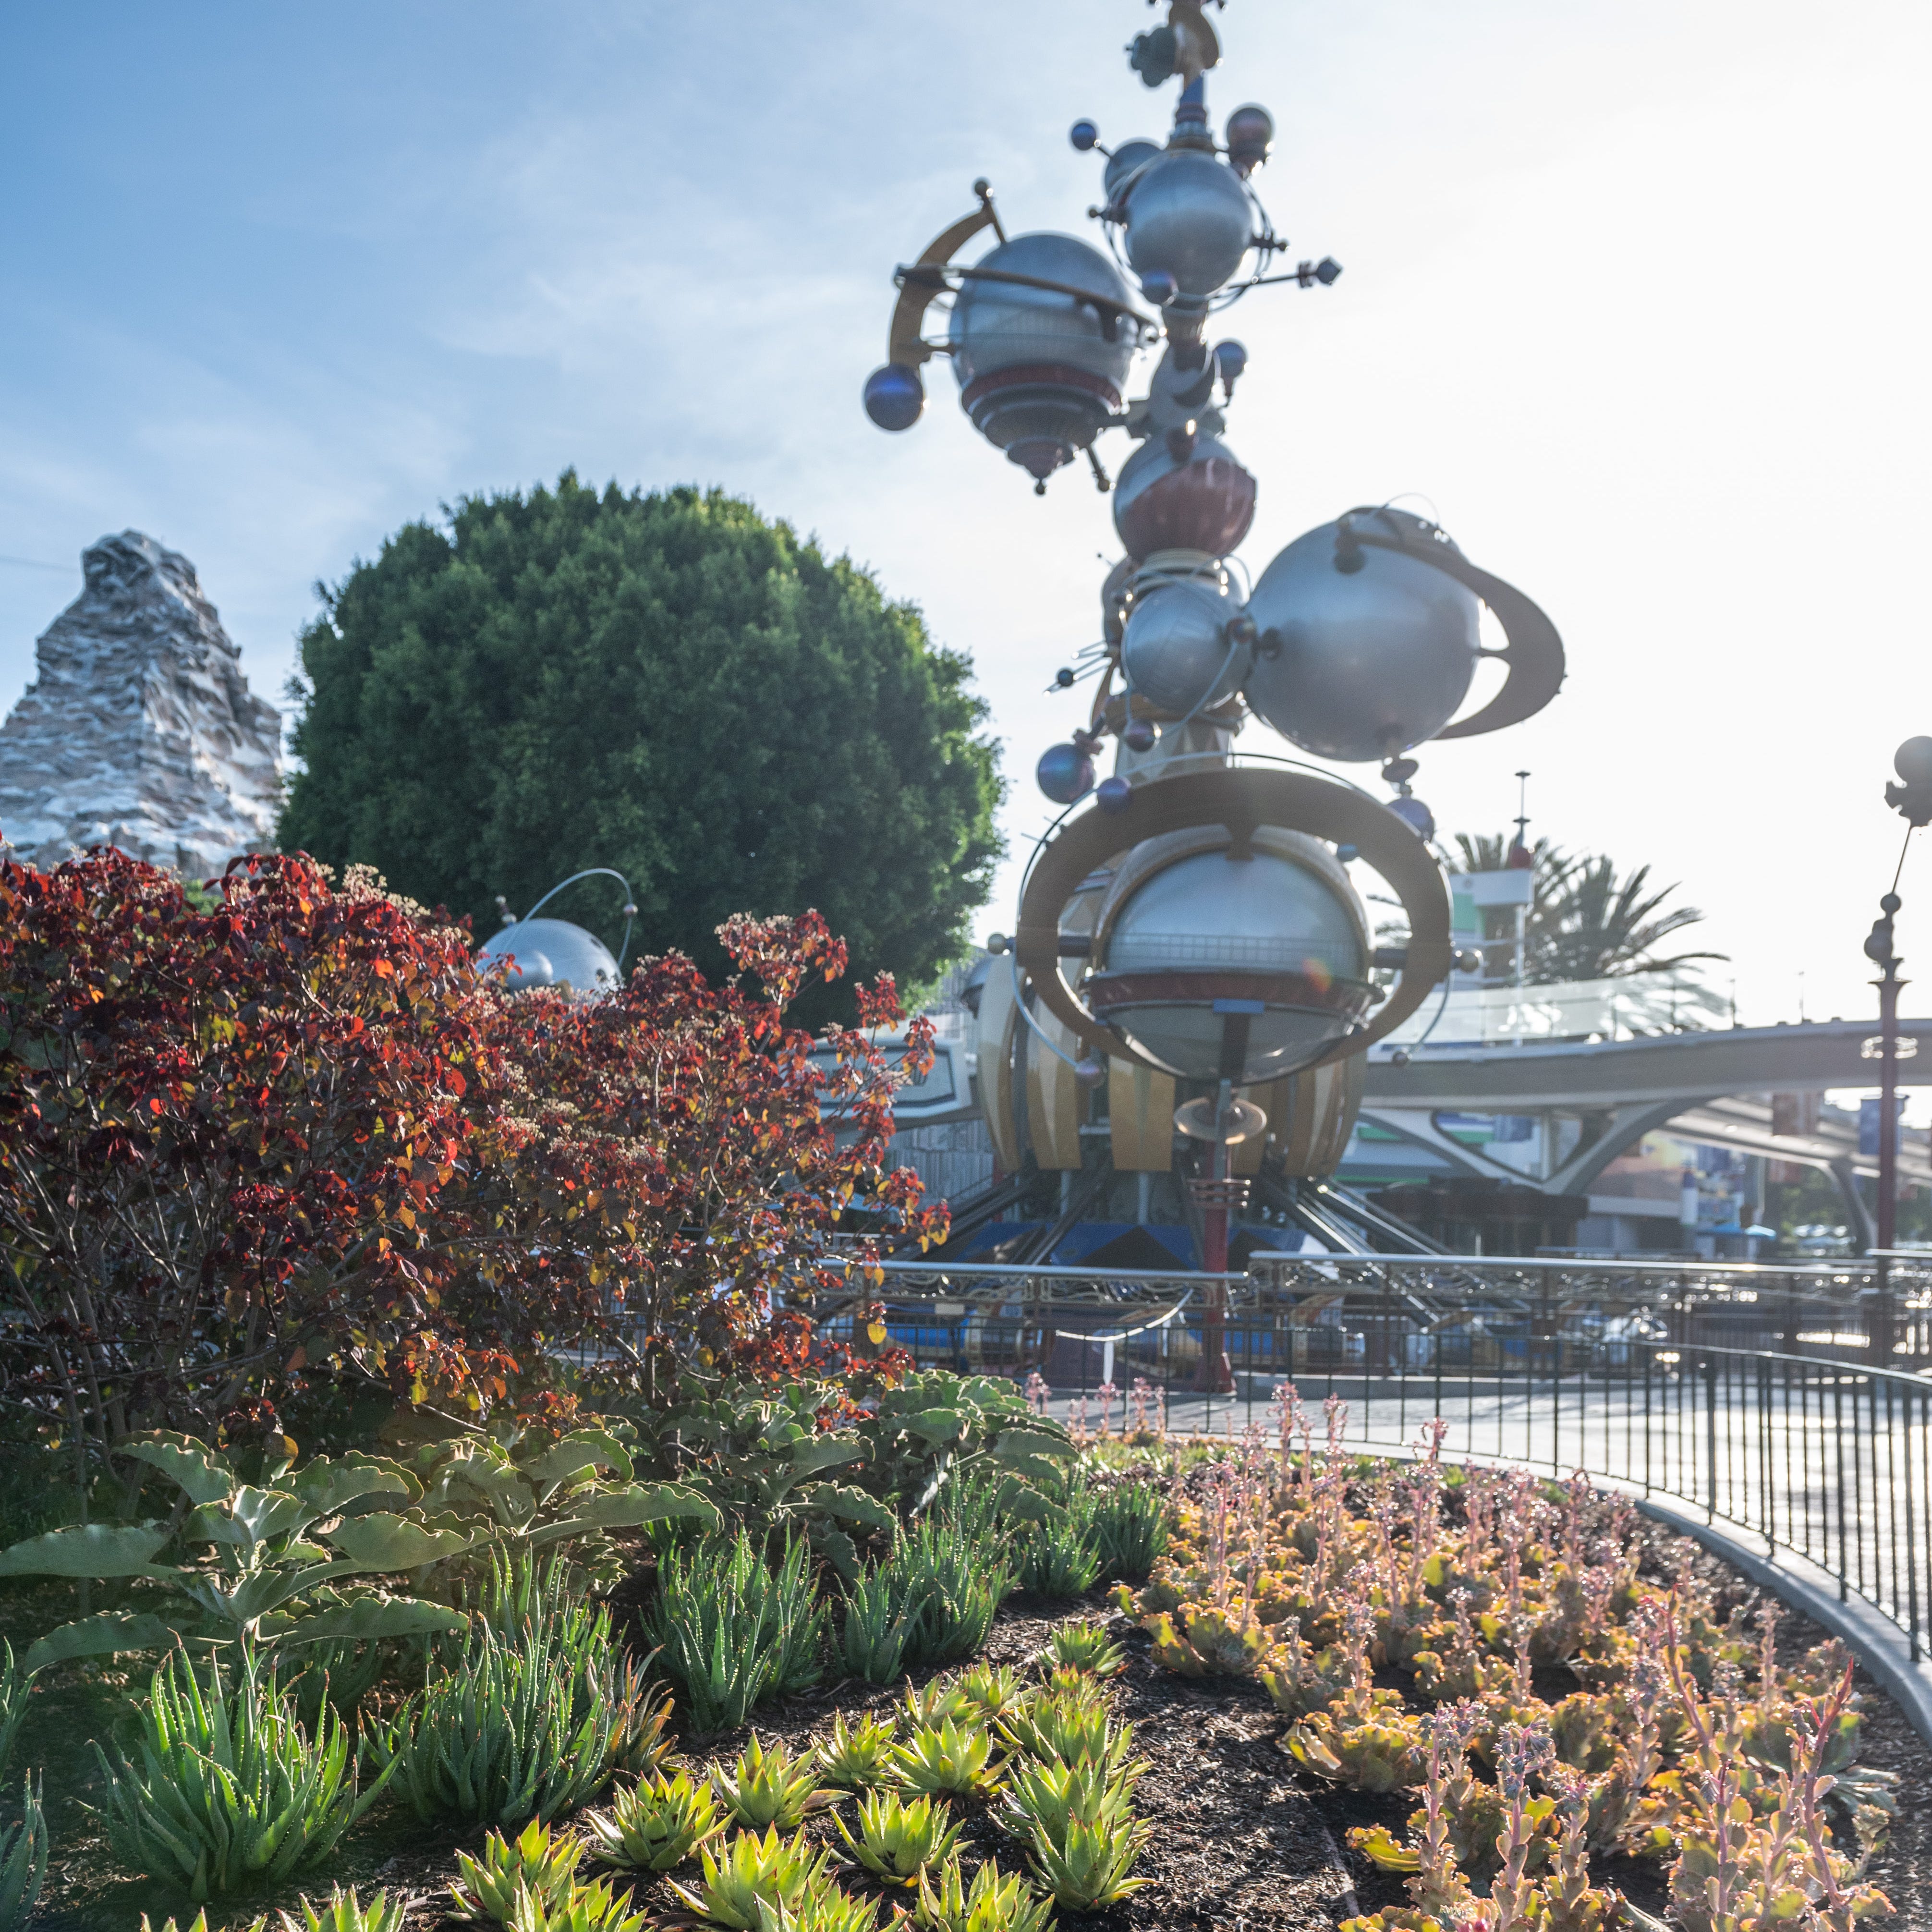 Disneyland uses drought-tolerant plants in many places and carefully monitors irrigation throughout the California resort.